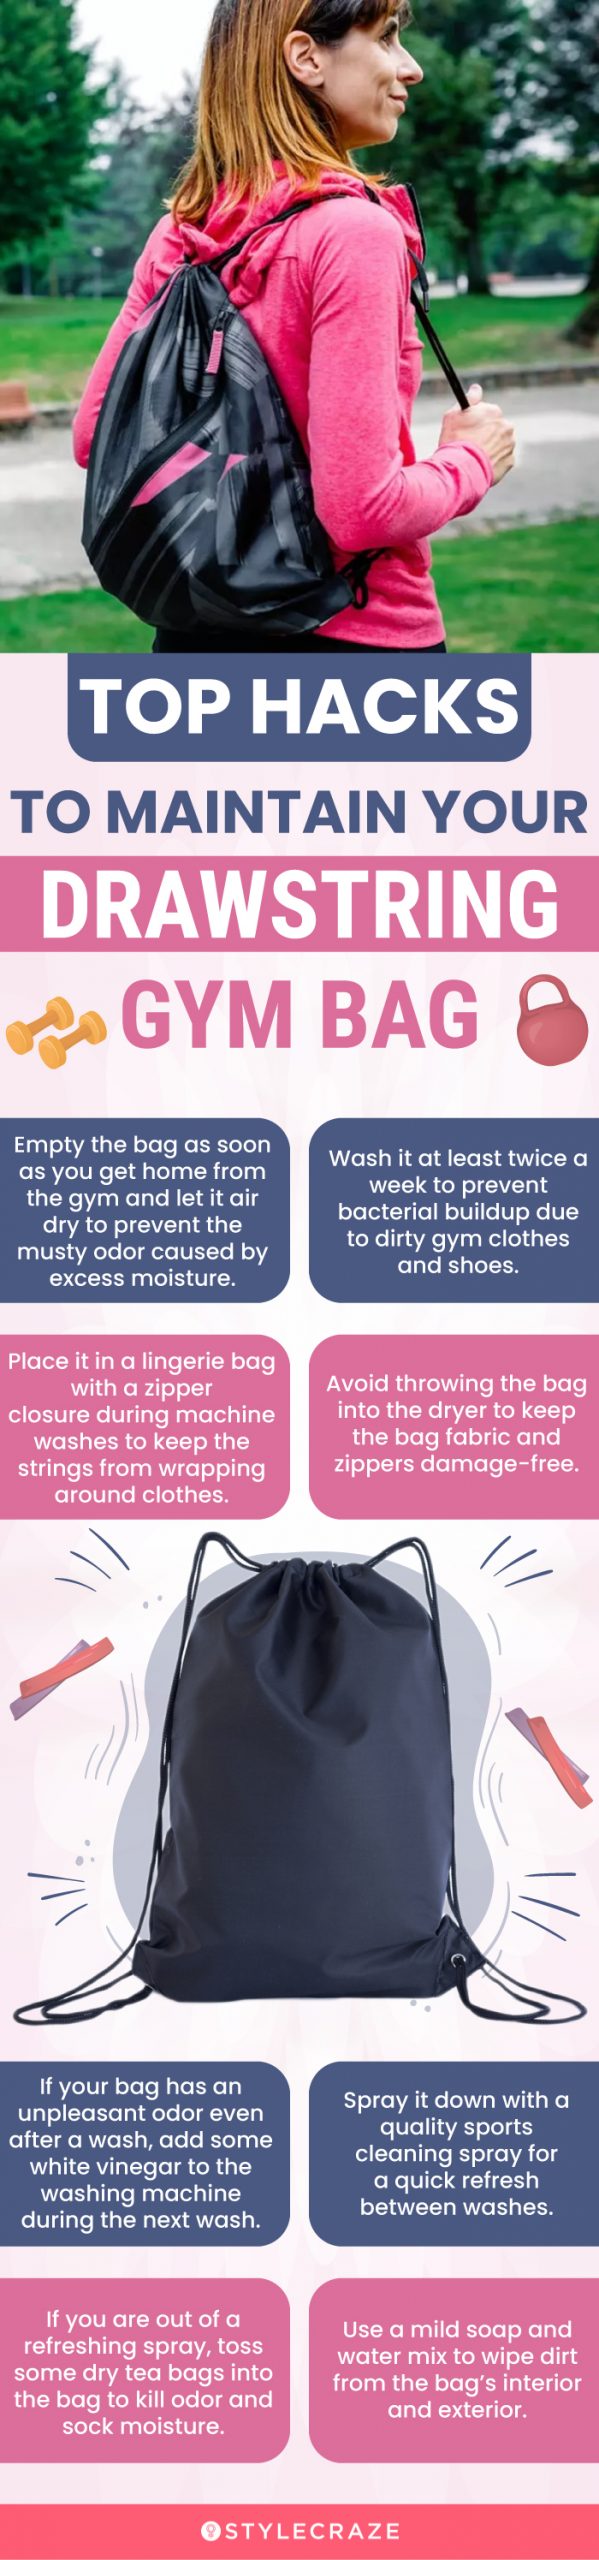 Top Hacks To Maintain Your Drawstring Gym Bag (infographic)